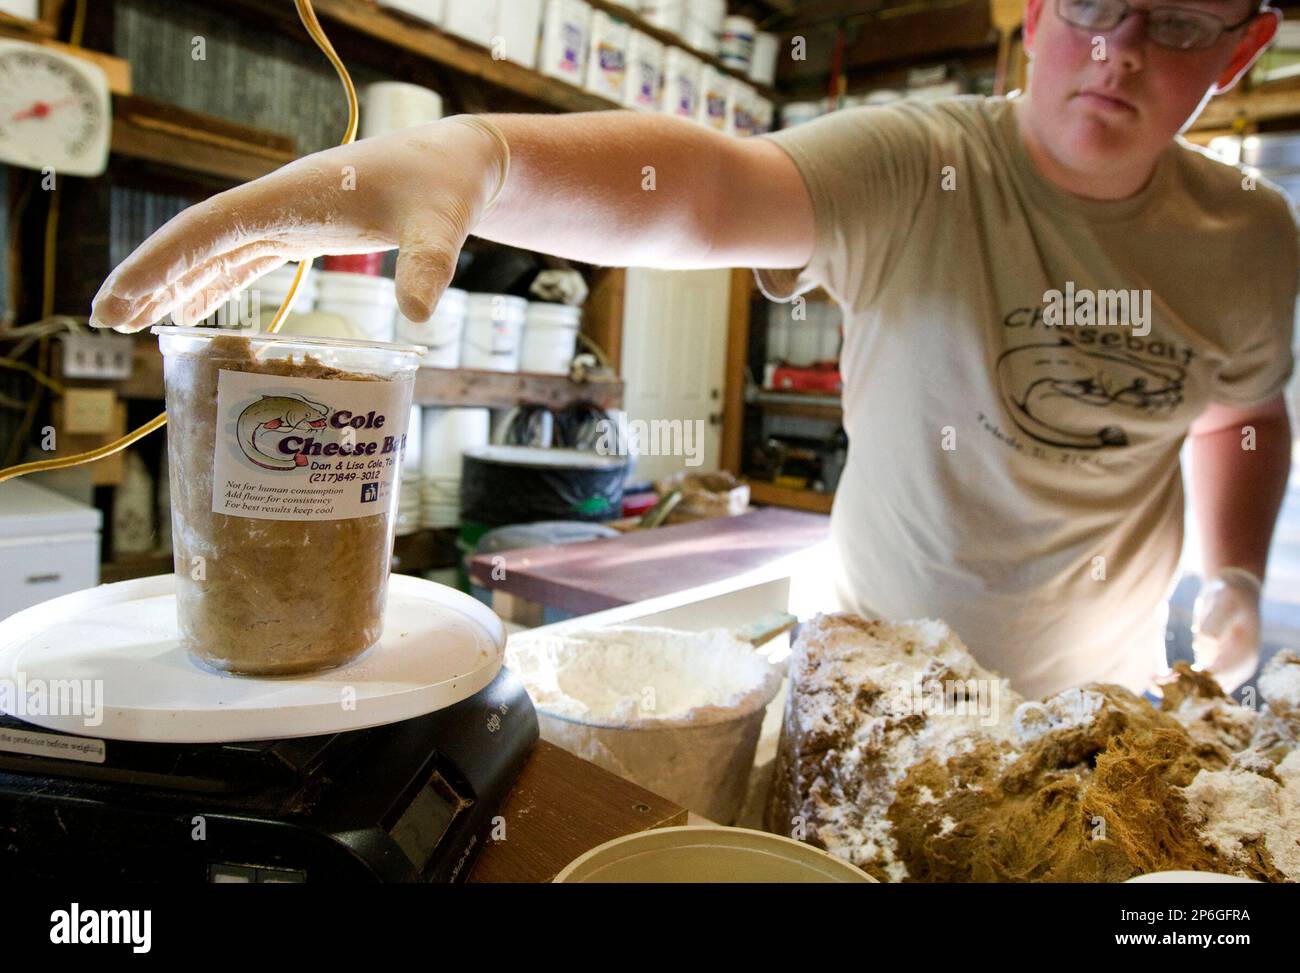 ADVANCE FOR USE SUNDAY, APRIL 15 AND THEREAFTER - In this photo taken April  5, 2012, Colin Cole, 15, weighs a container of hand-made catfish bait at  family's 500-acre farm in the